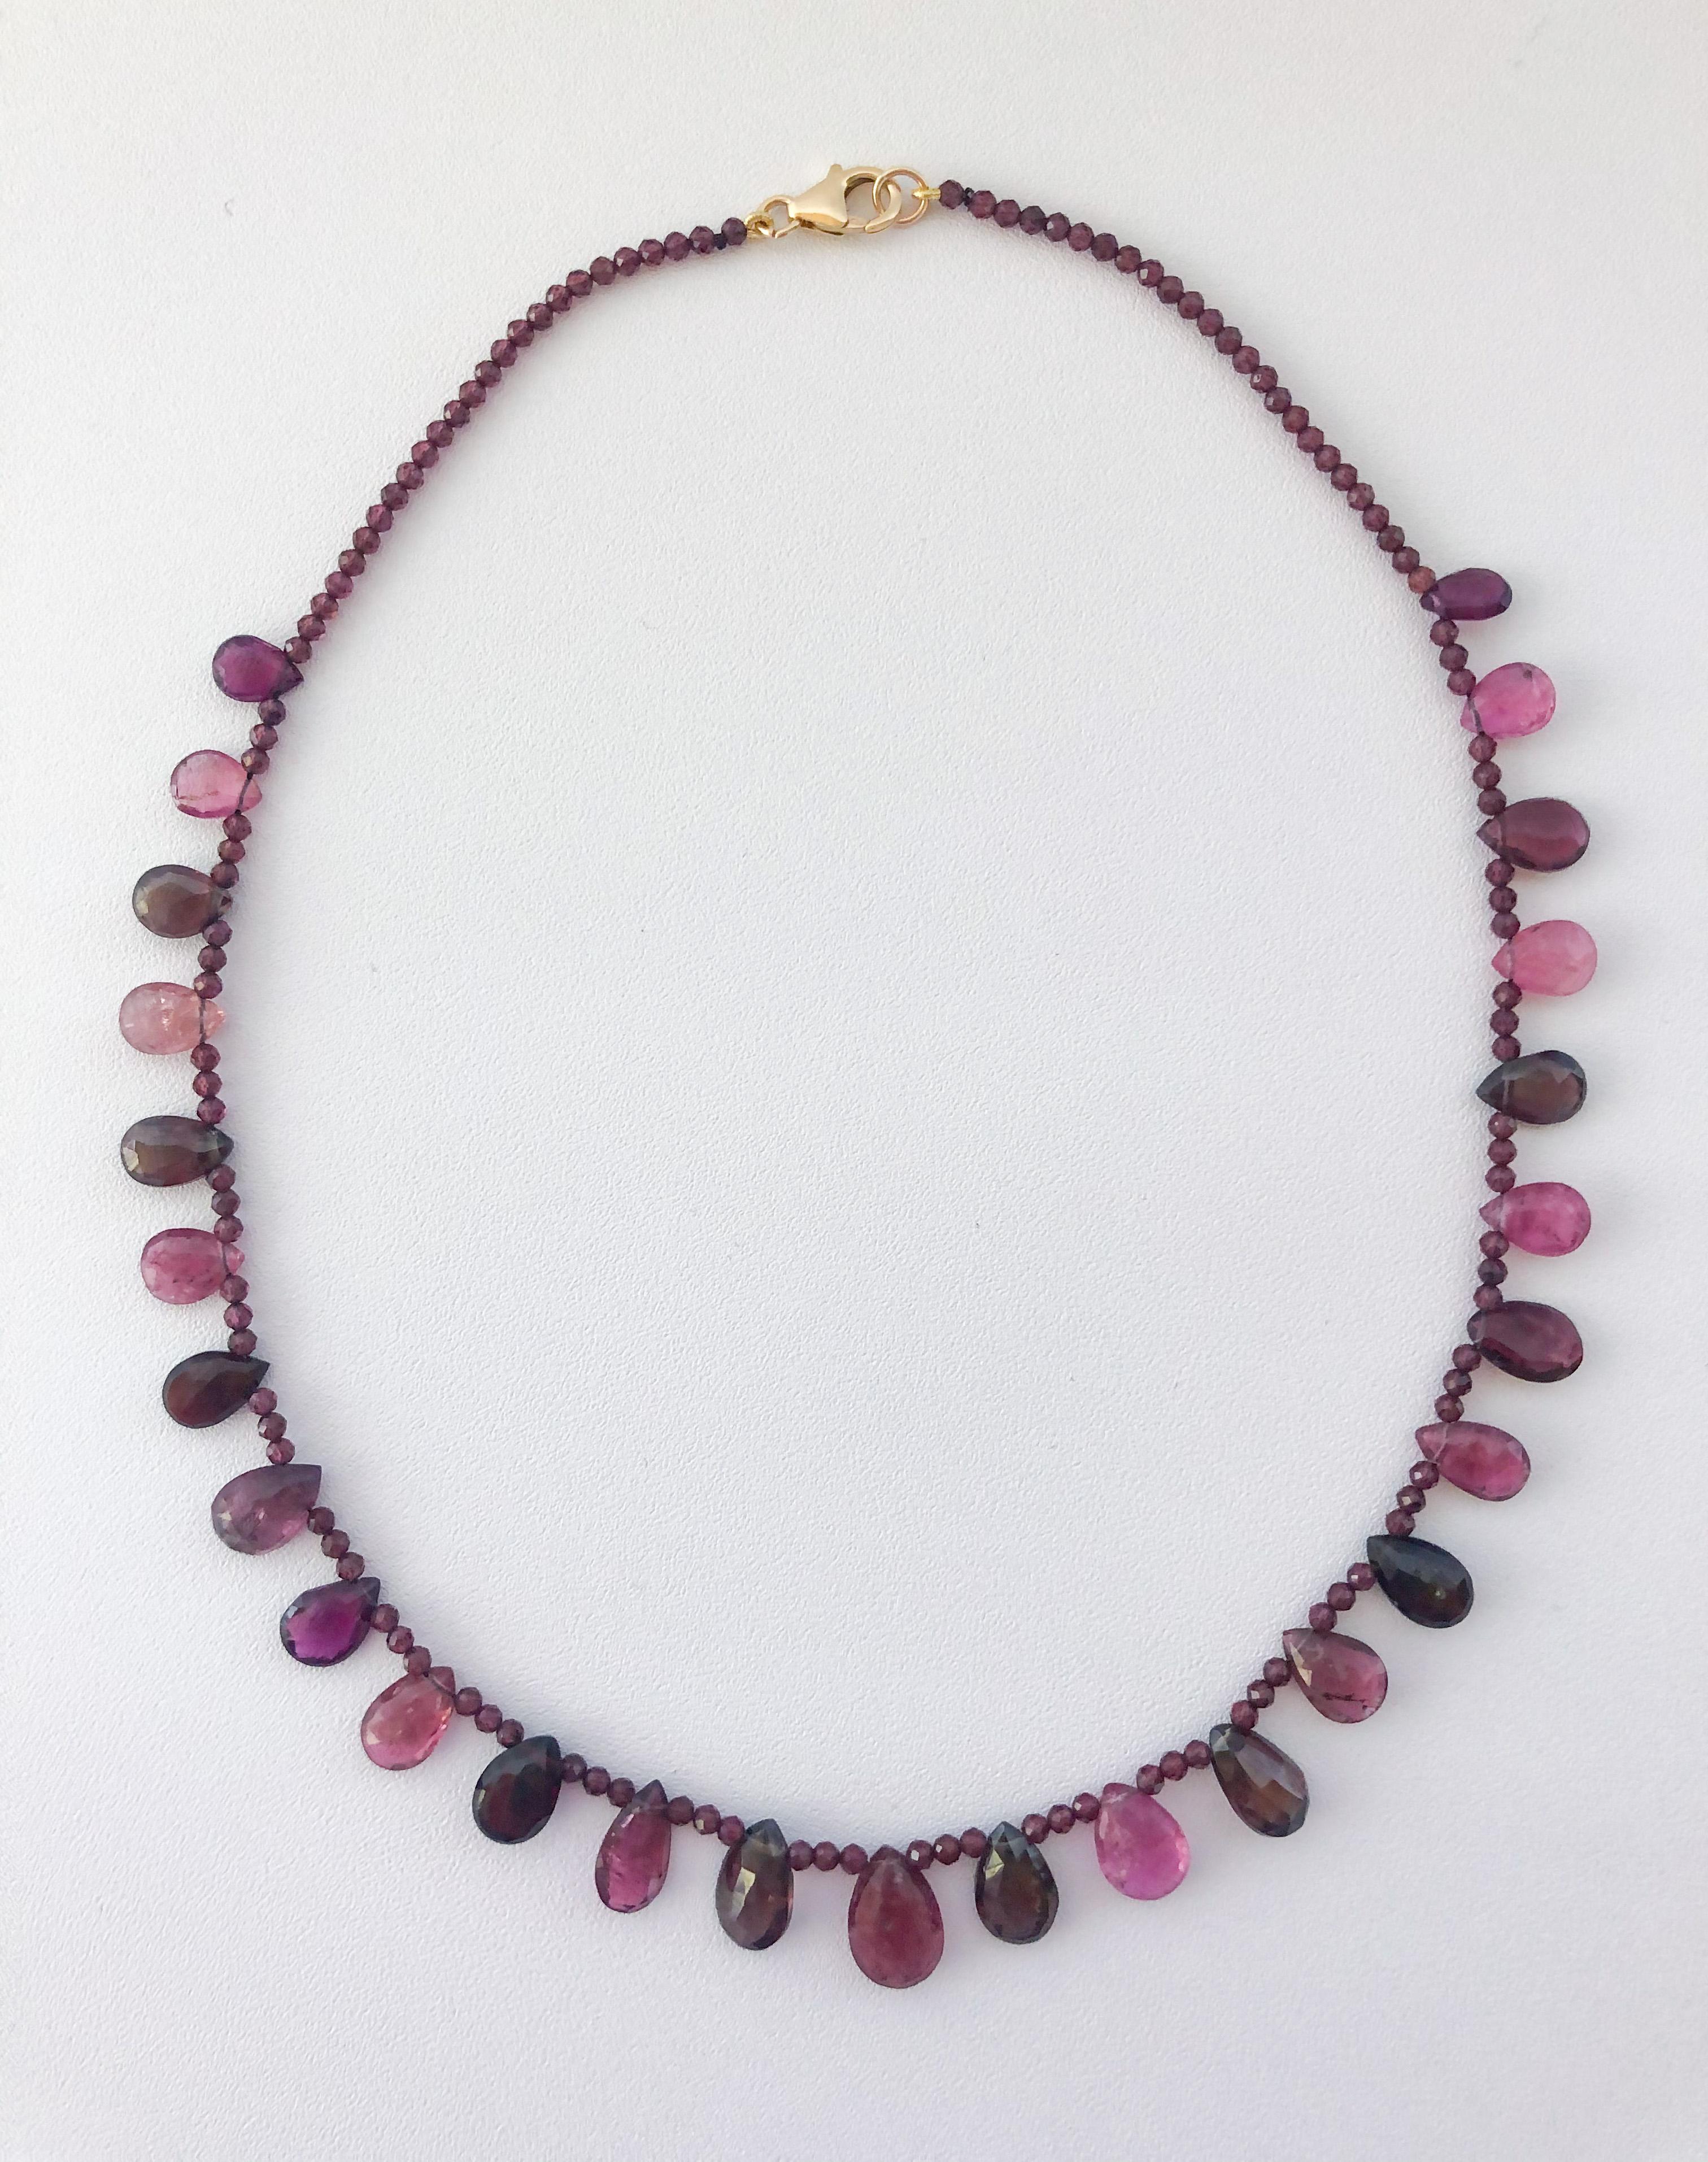 Artisan Marina J. Garnet and Multicolored Pink Tourmaline Necklace with Silver Clasp For Sale